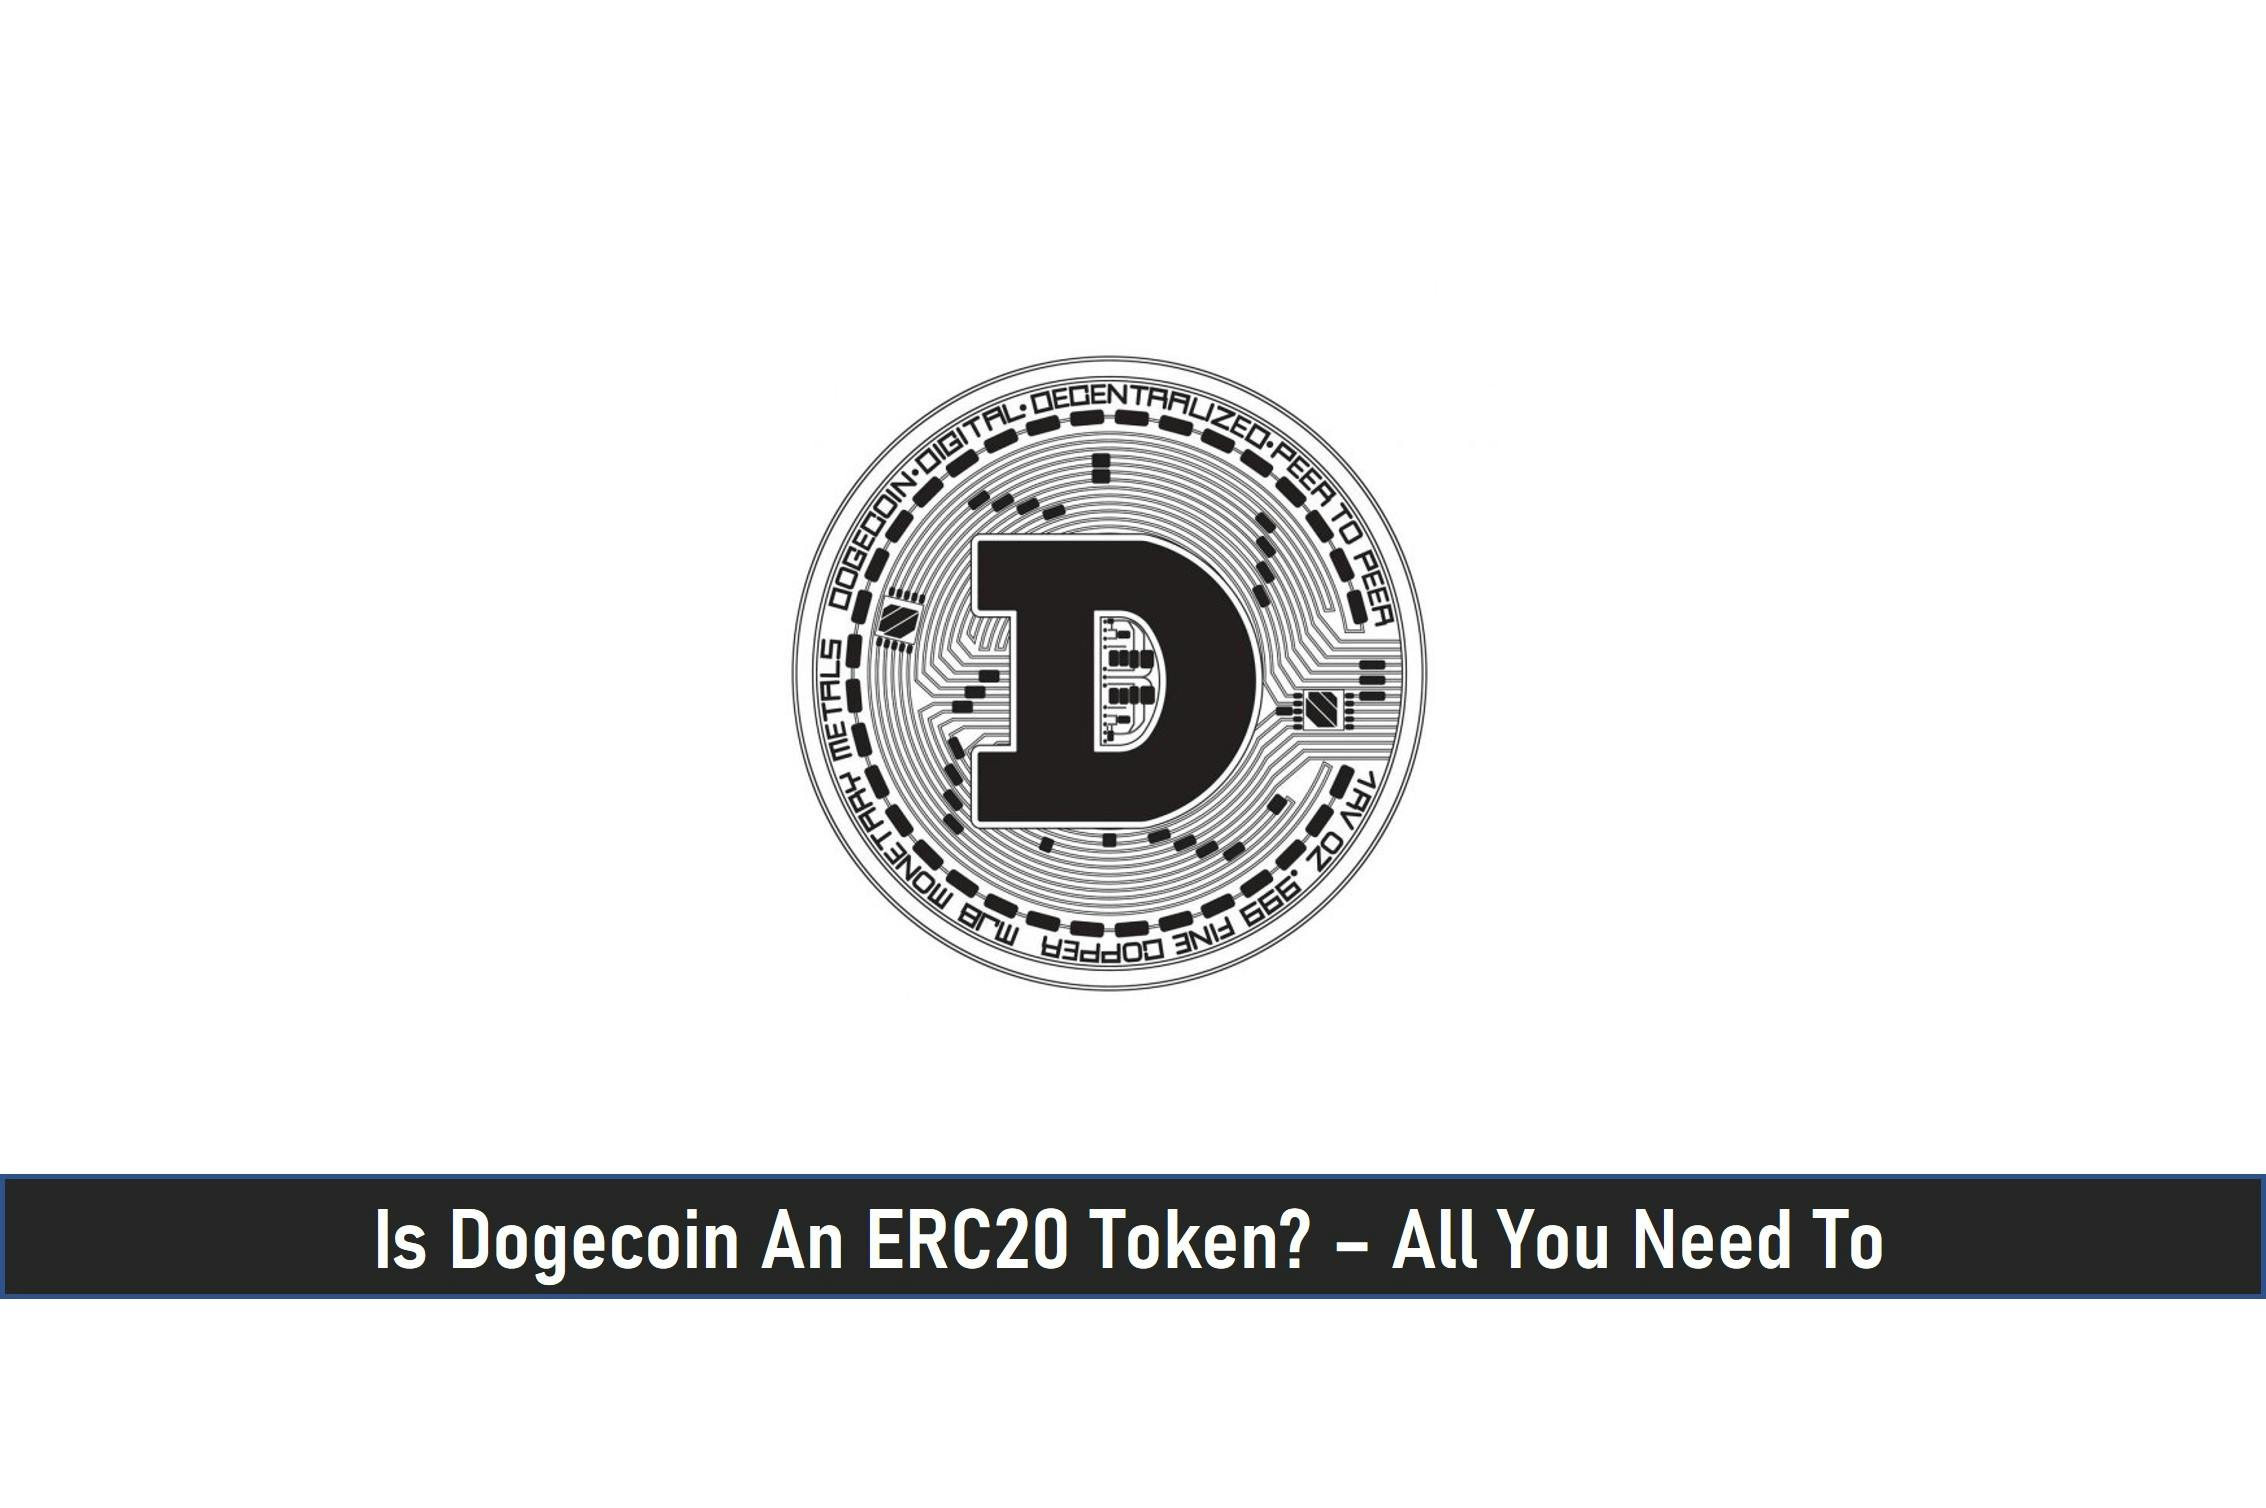 Is Dogecoin An ERC20 Token? – All You Need To Know